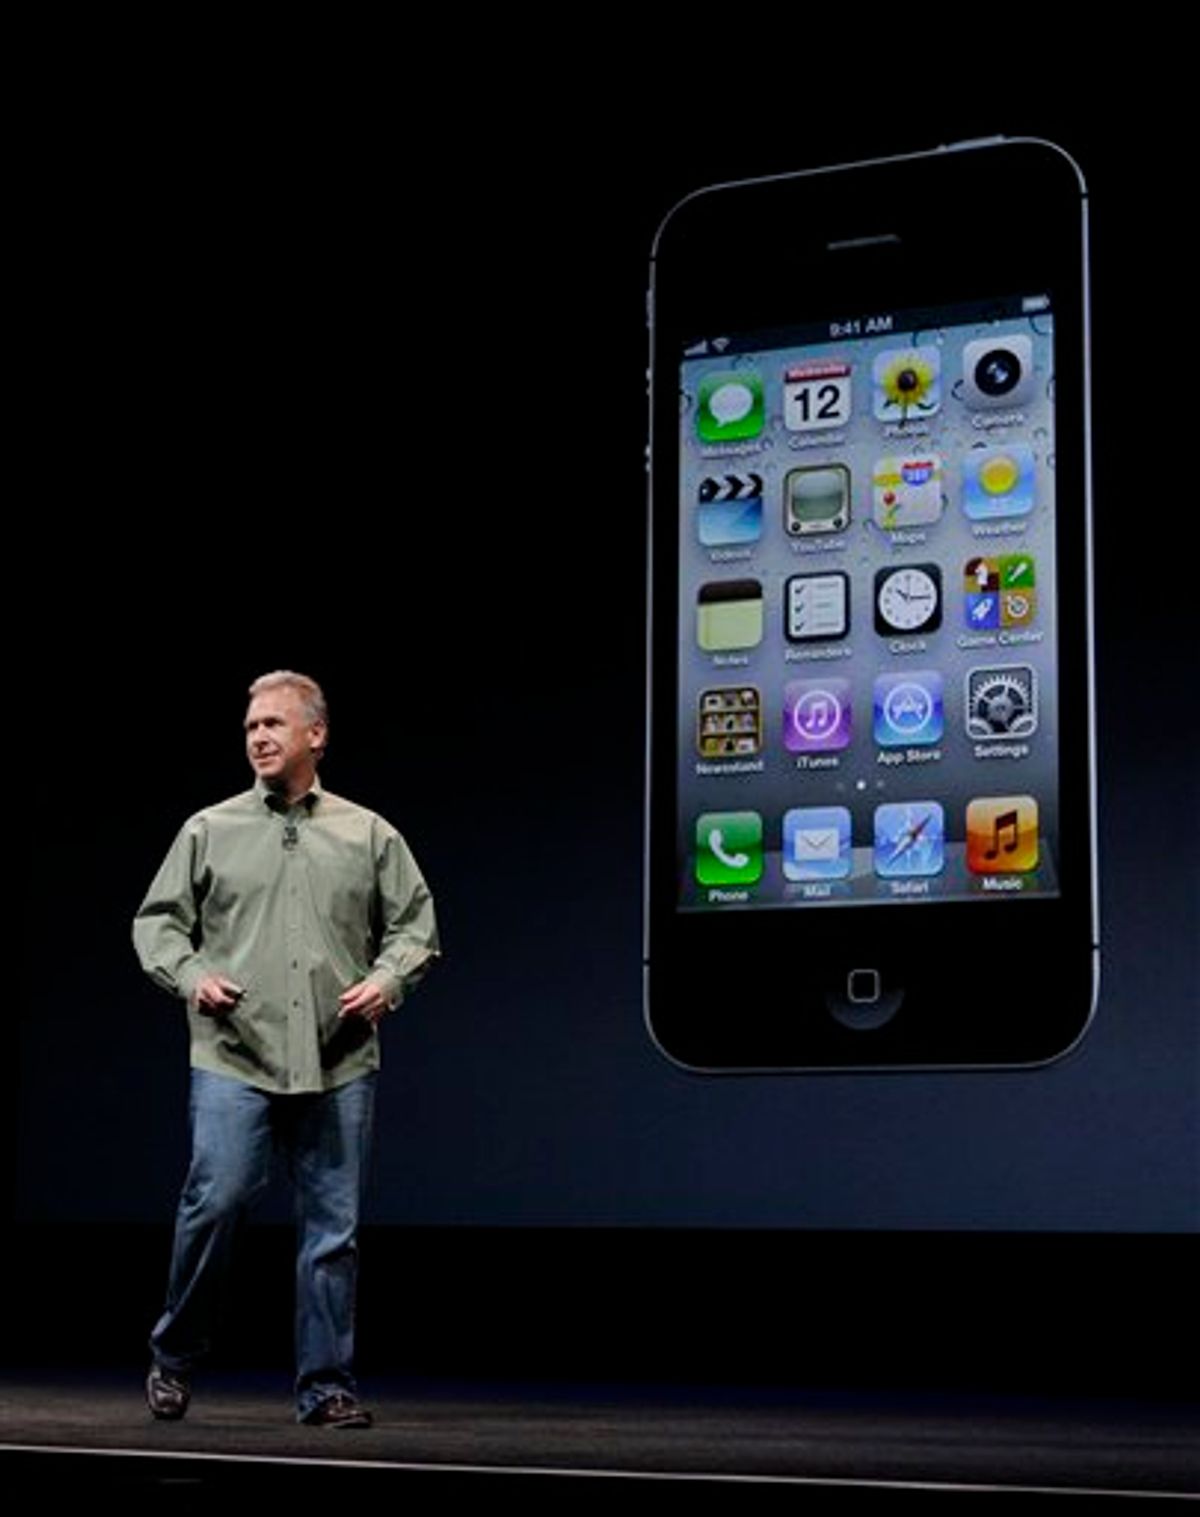 Phil Schiller, Apple's senior vice president of worldwide marketing, speaks on stage during an introduction of the new iPhone 5 at an Apple event in San Francisco, Wednesday Sept. 12, 2012. (AP Photo/Eric Risberg)      (Associated Press)